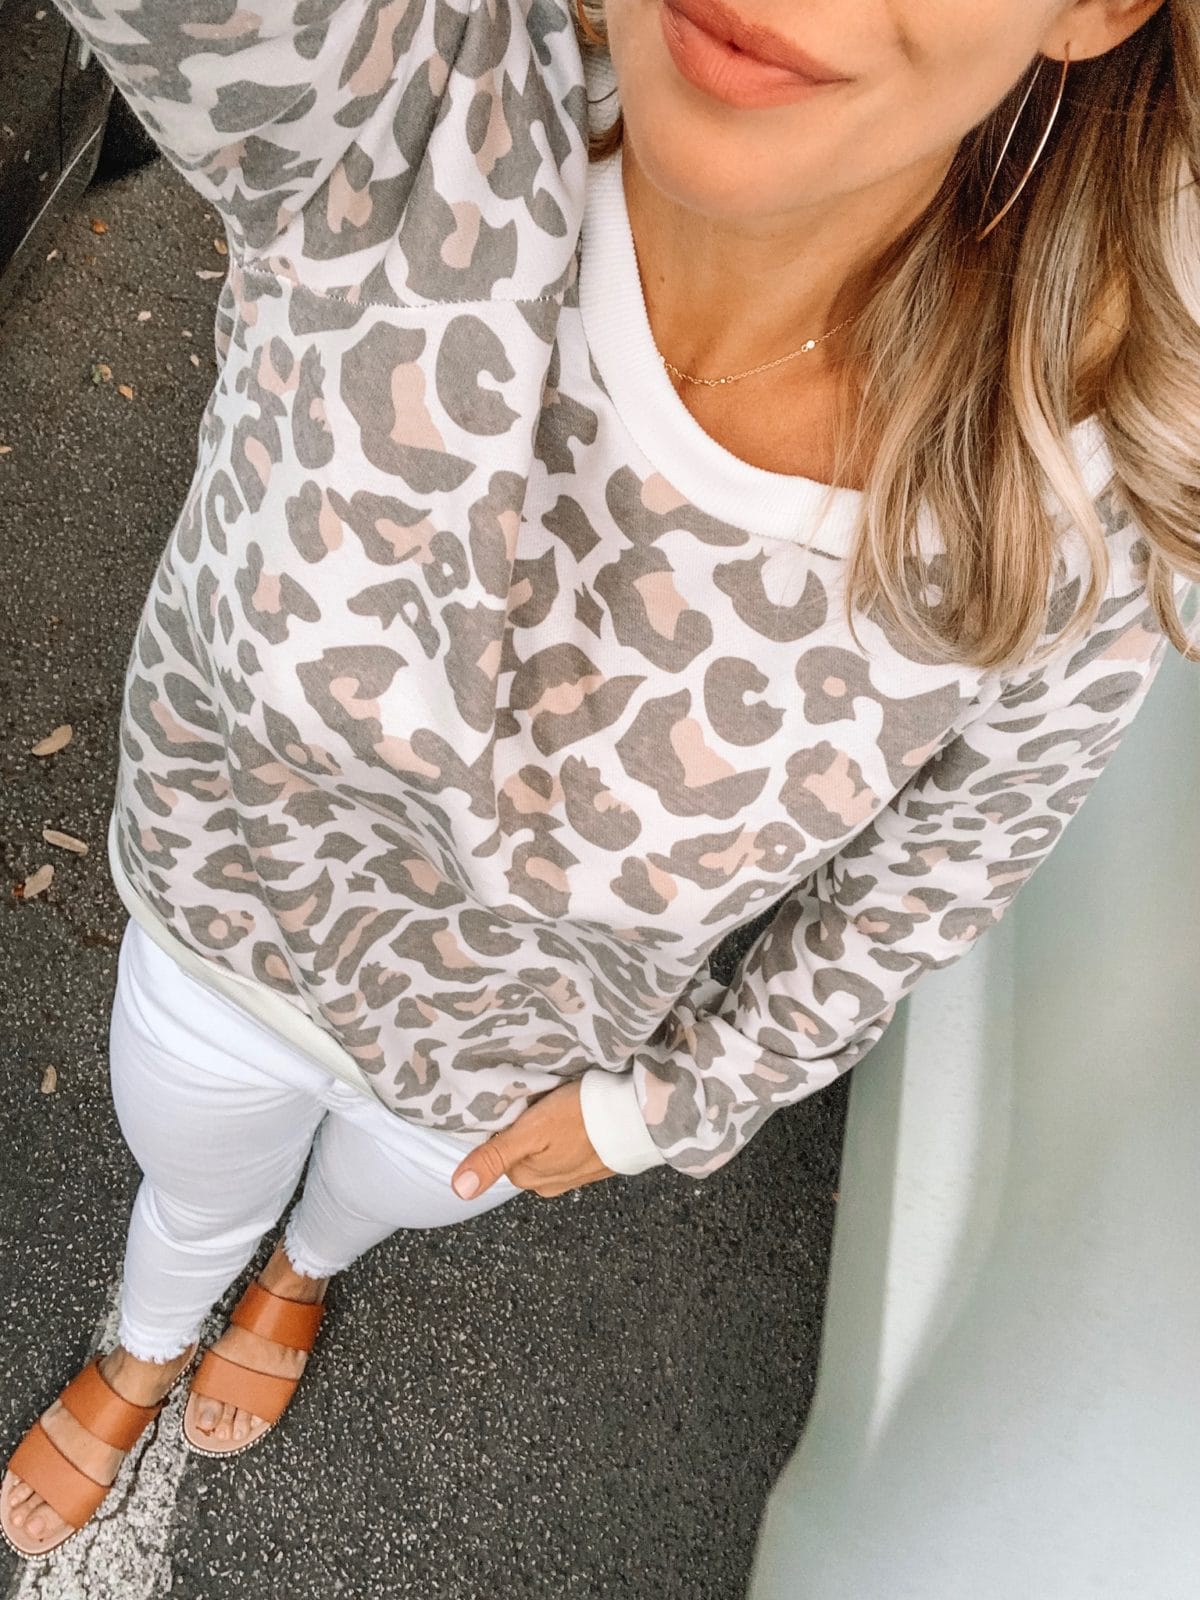 Amazon Fashion Prime Day Haul - Leopard pullover with white jeans